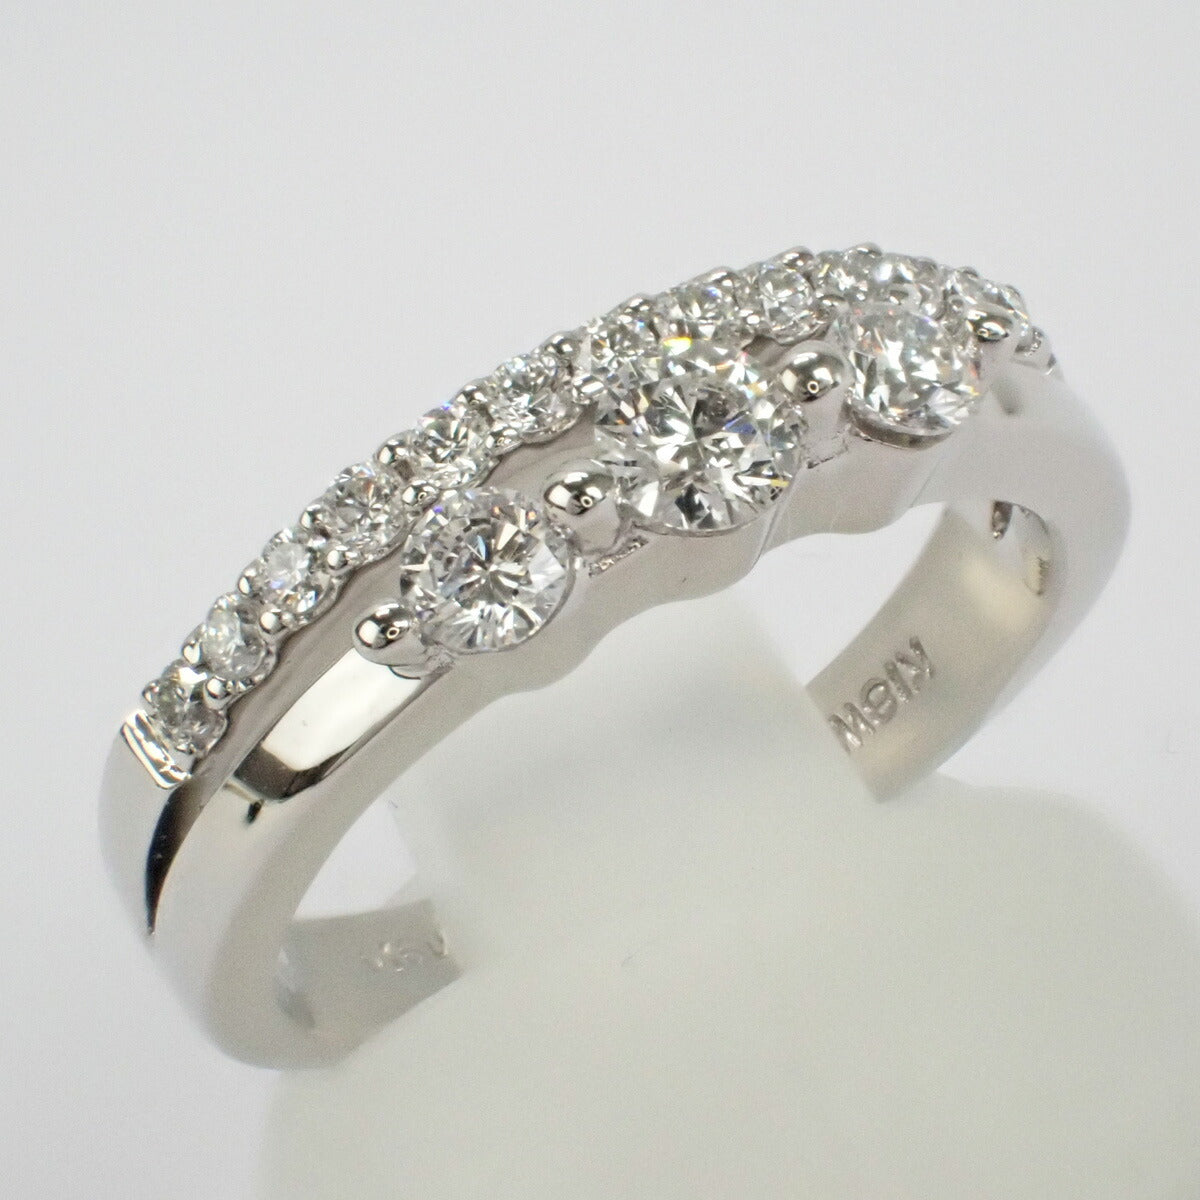 [LuxUness]  K18 White Gold Diamond 0.16ct and 0.43ct Designer Ring, Ladies' Size 11 – Pre-owned in Excellent condition